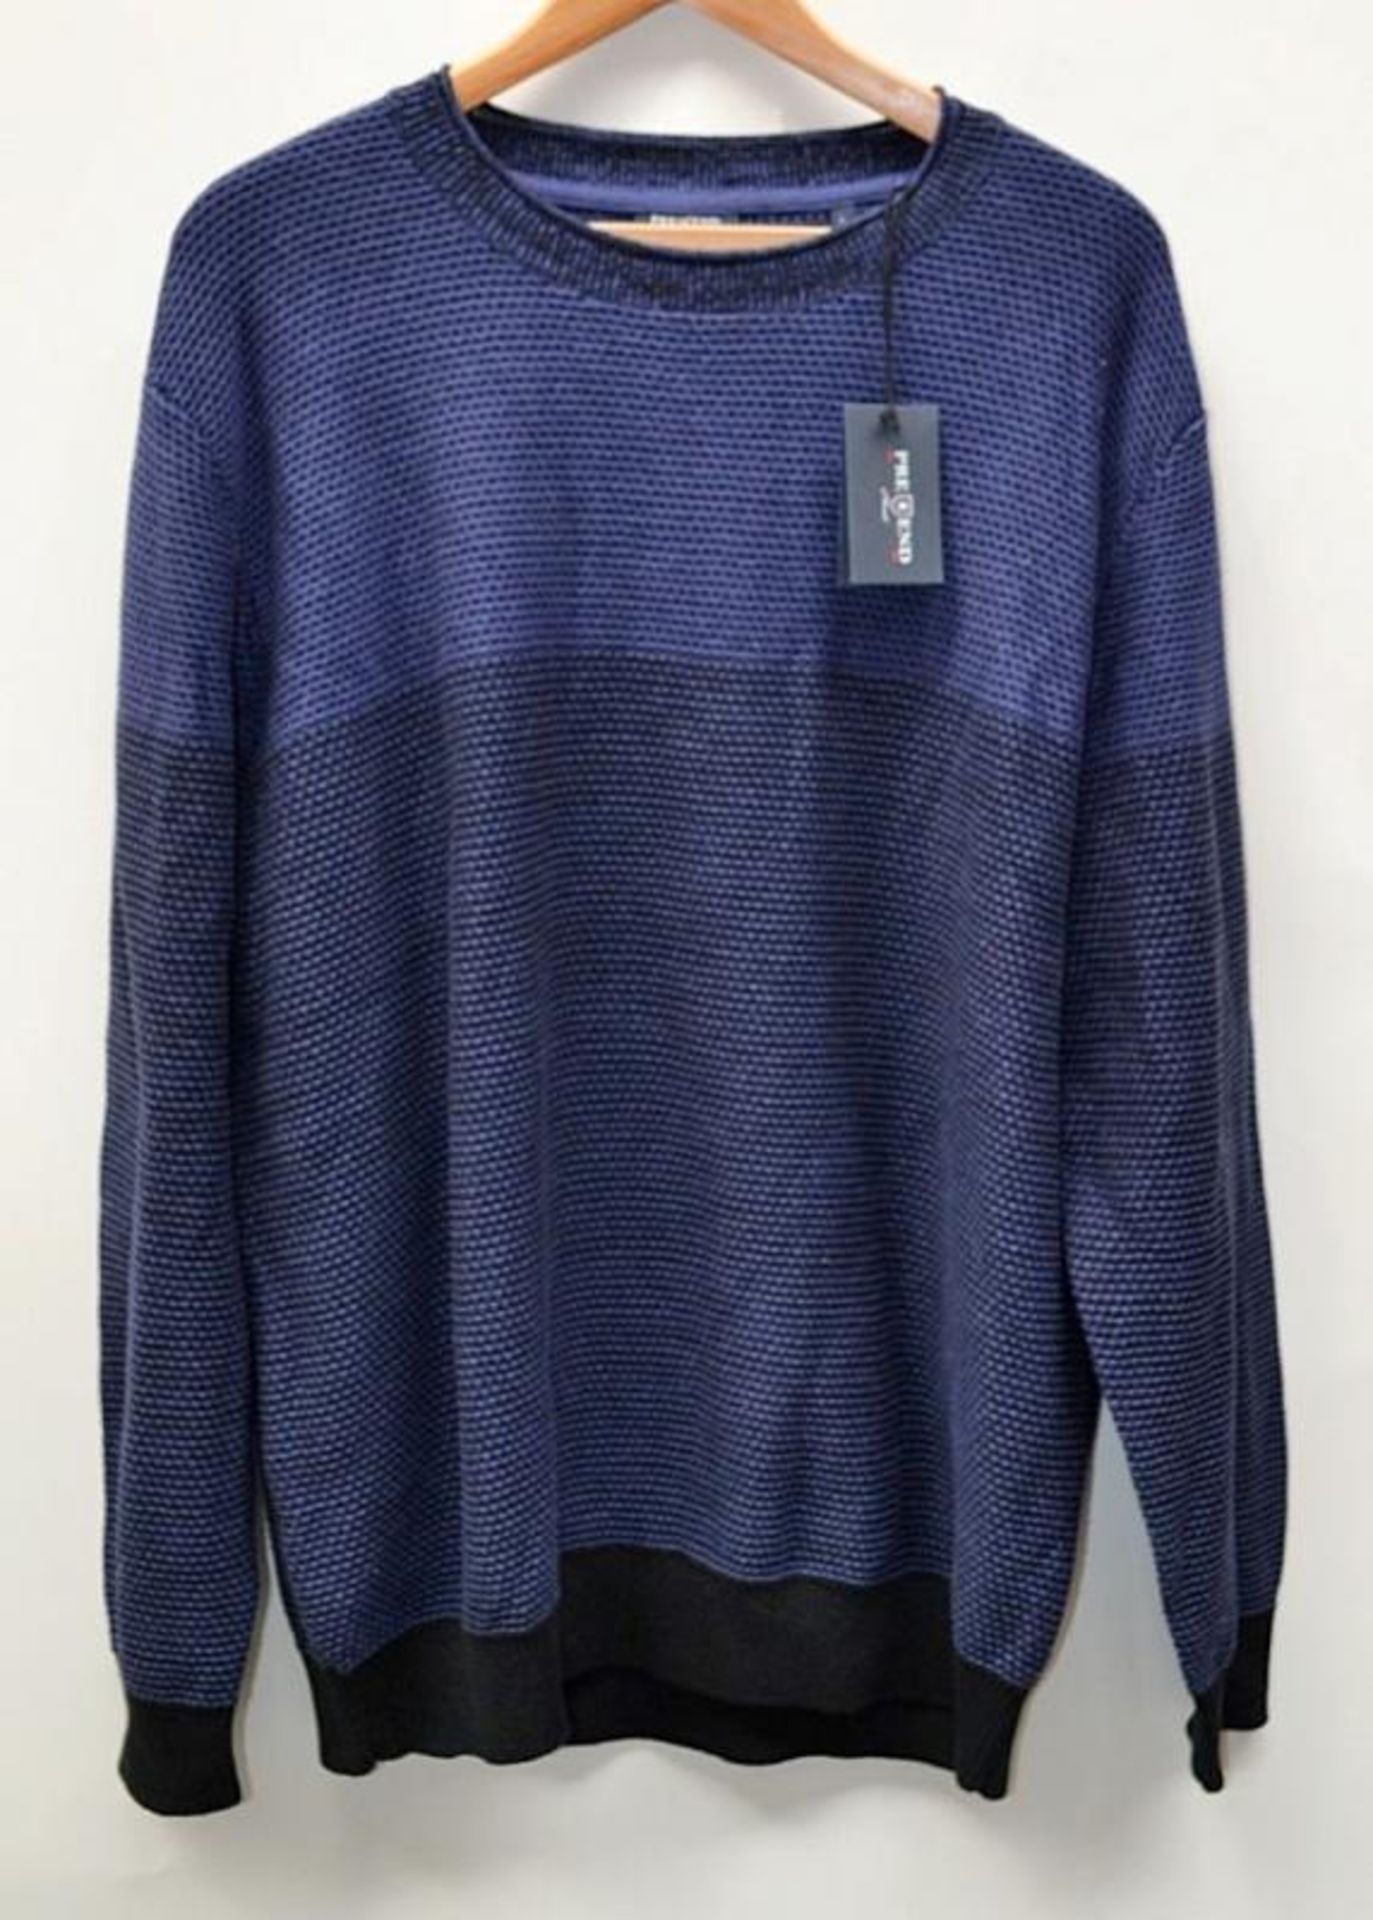 5 x Assorted Pre End Branded Mens Long Sleeve Knitware / Jumpers - New Stock With Tags - Recent - Image 7 of 7